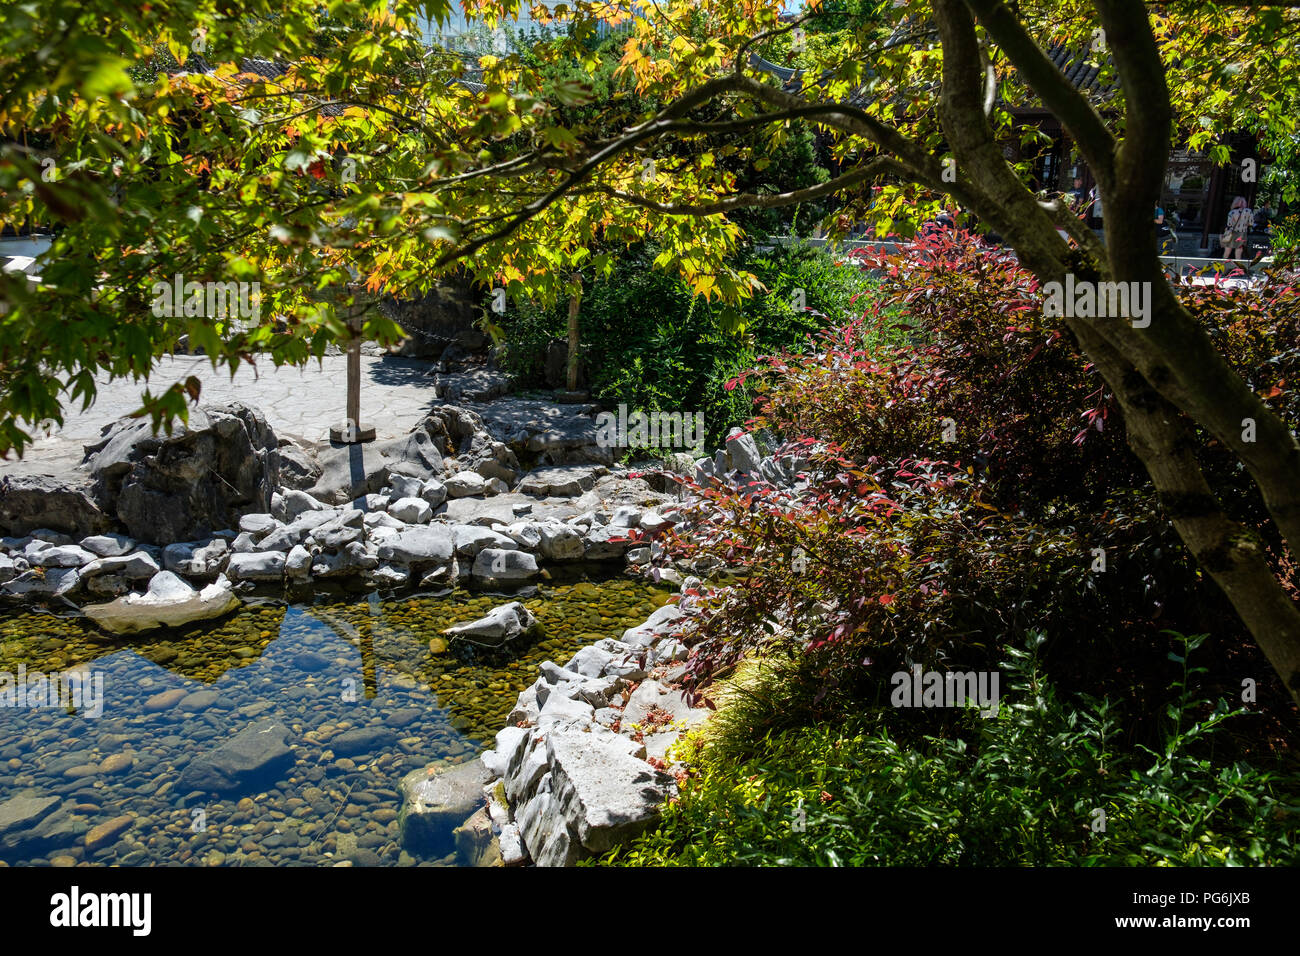 Trees and plants in Lan Su Chinese Garden, Portland, Oregon, USA Stock Photo